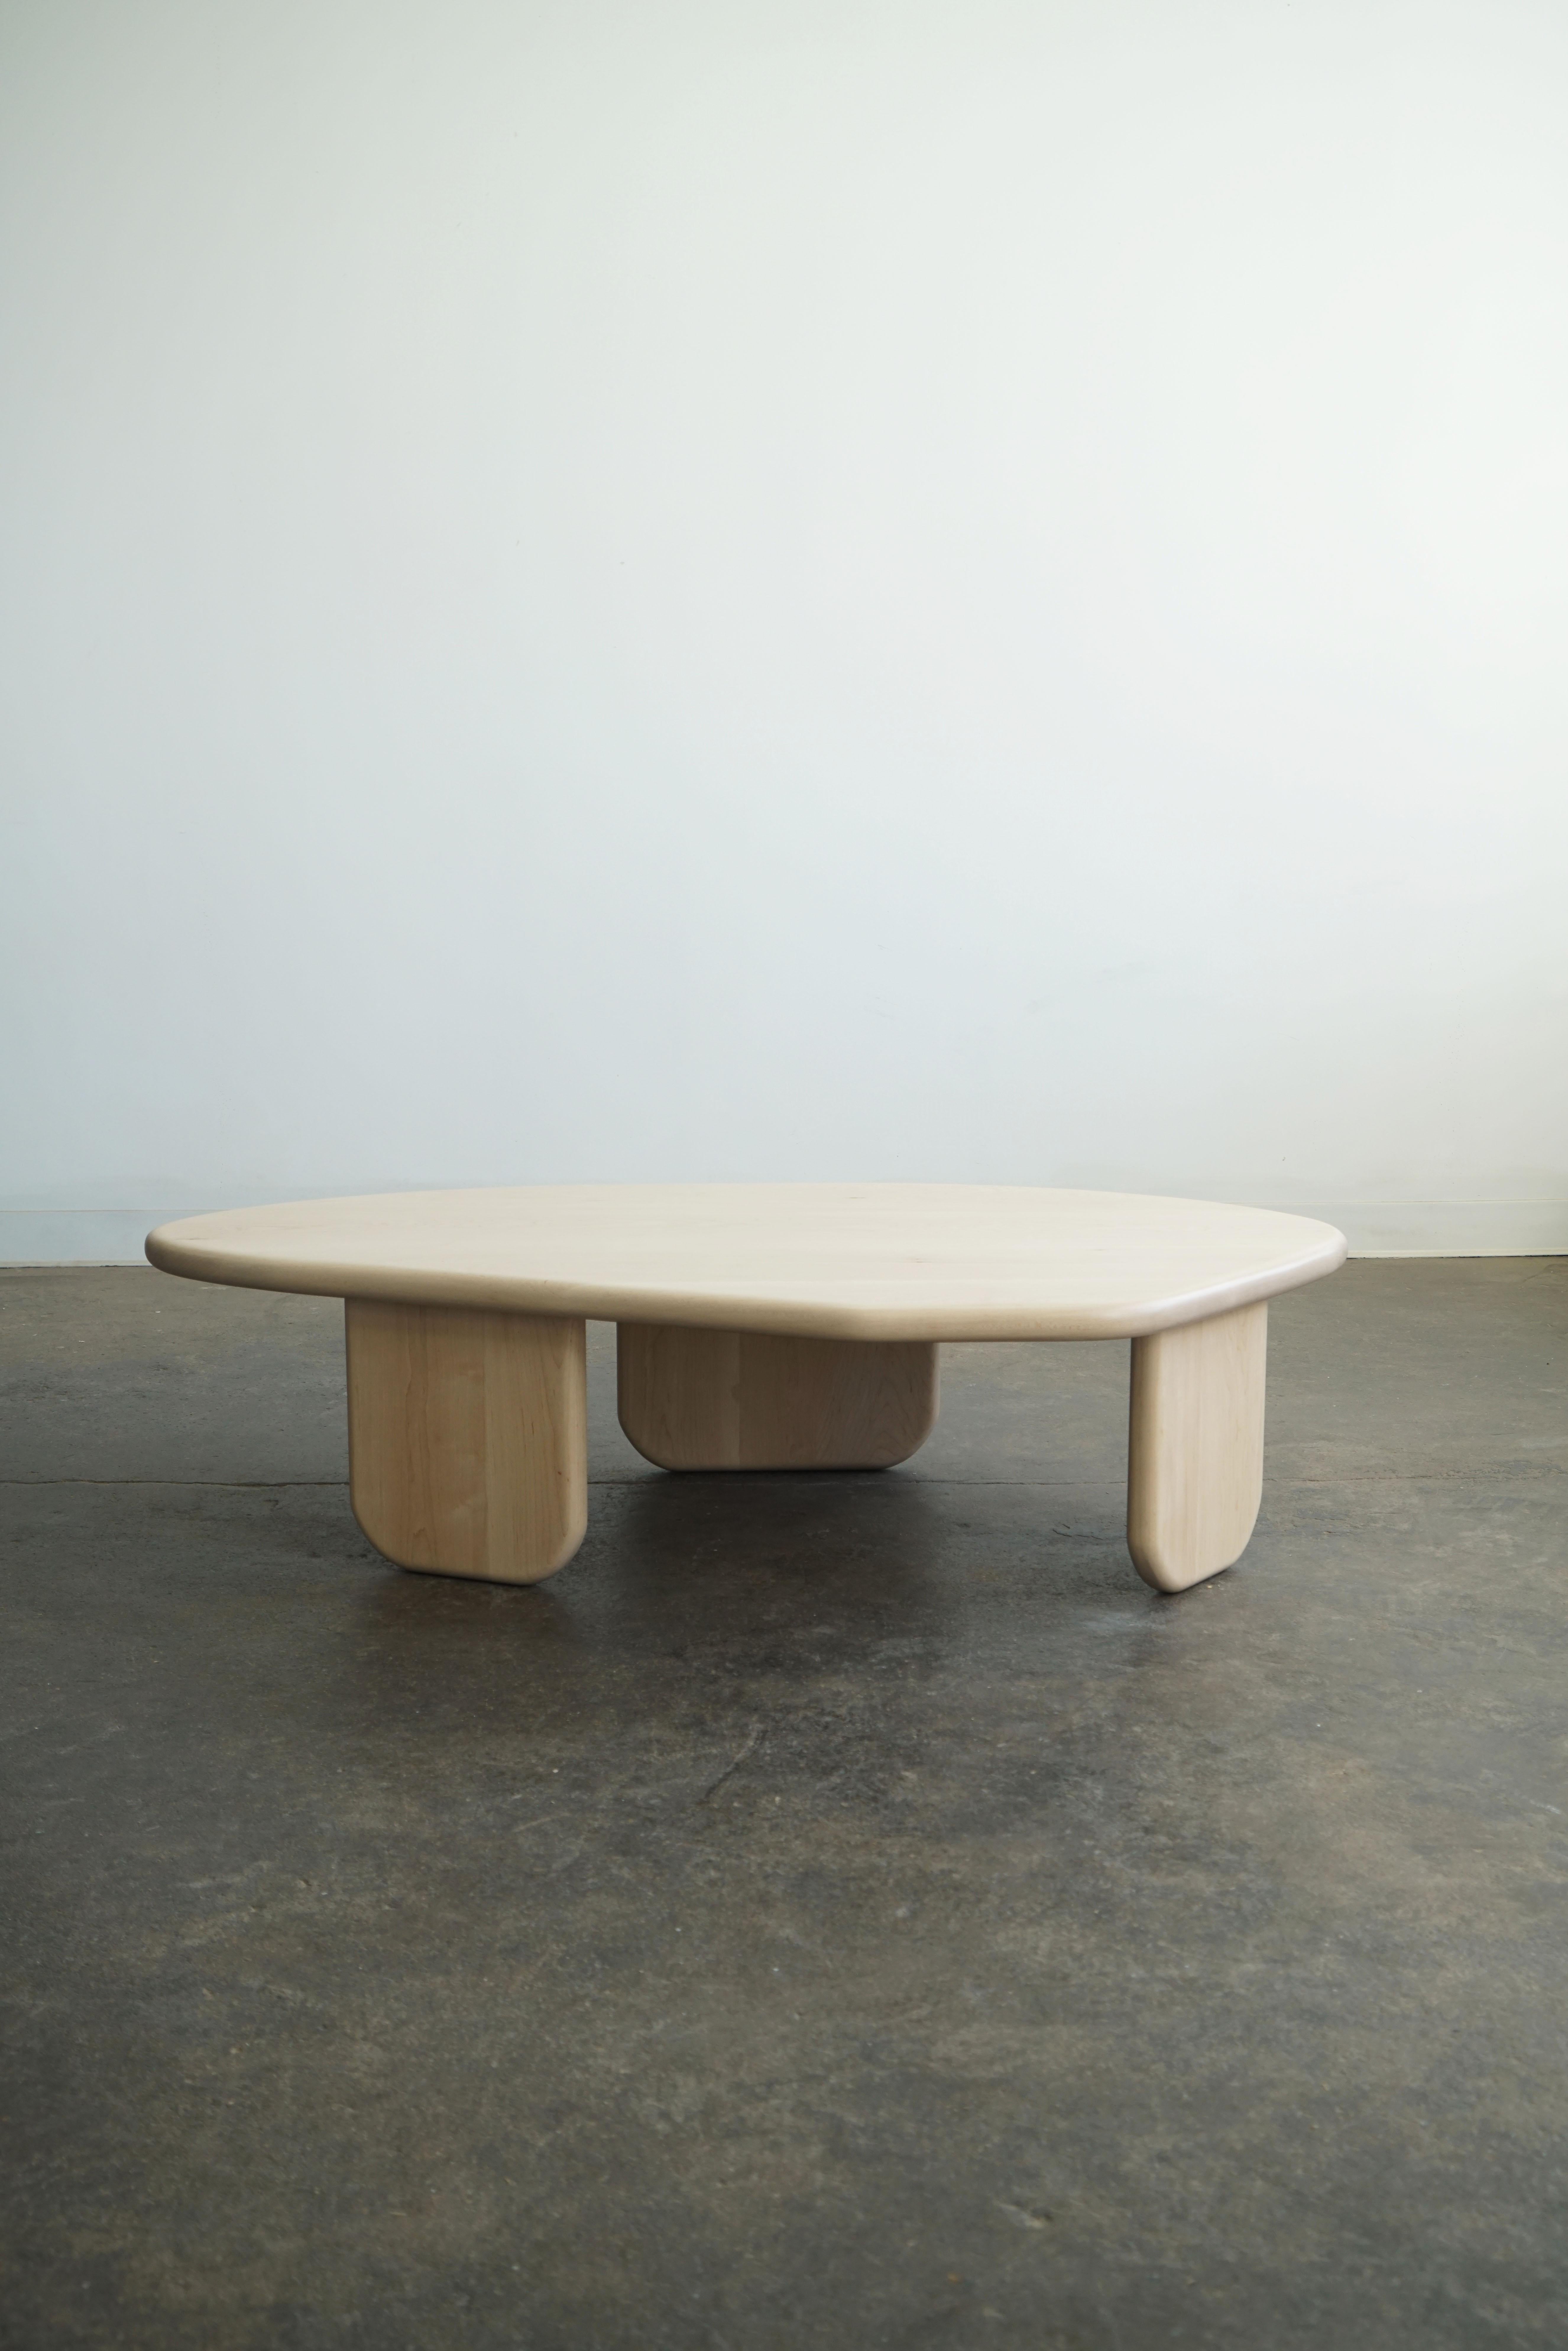 American Organic Shaped Coffee Table by Last Workshop in Maple, Custom options For Sale